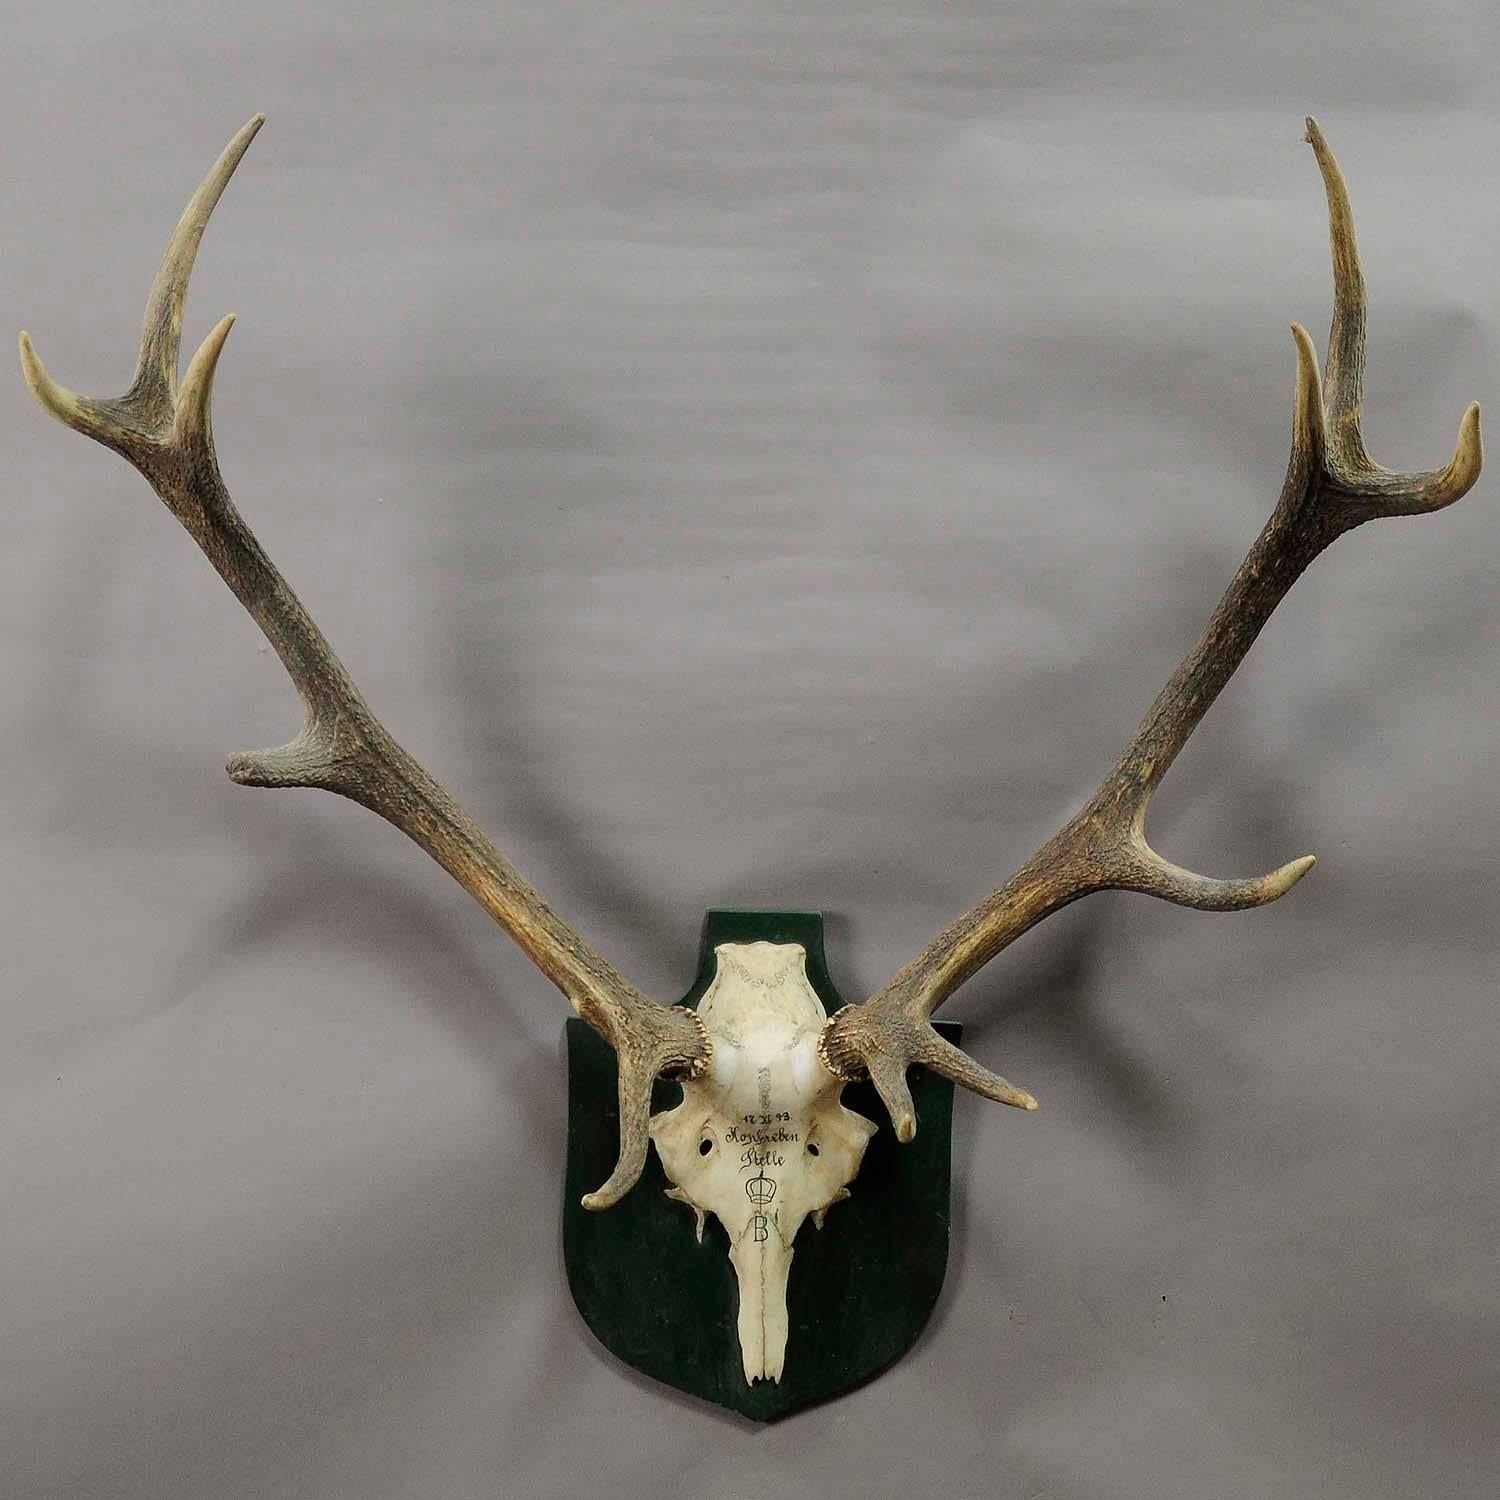 A large 12 pointer Black Forest deer trophy from the palace of Salem in south Germany. Shot by a member of the lordly family of Badenin, 1943. Handwritten inscriptions on the skull with, place of the hunt, date and family crest. Mounted on a wooden